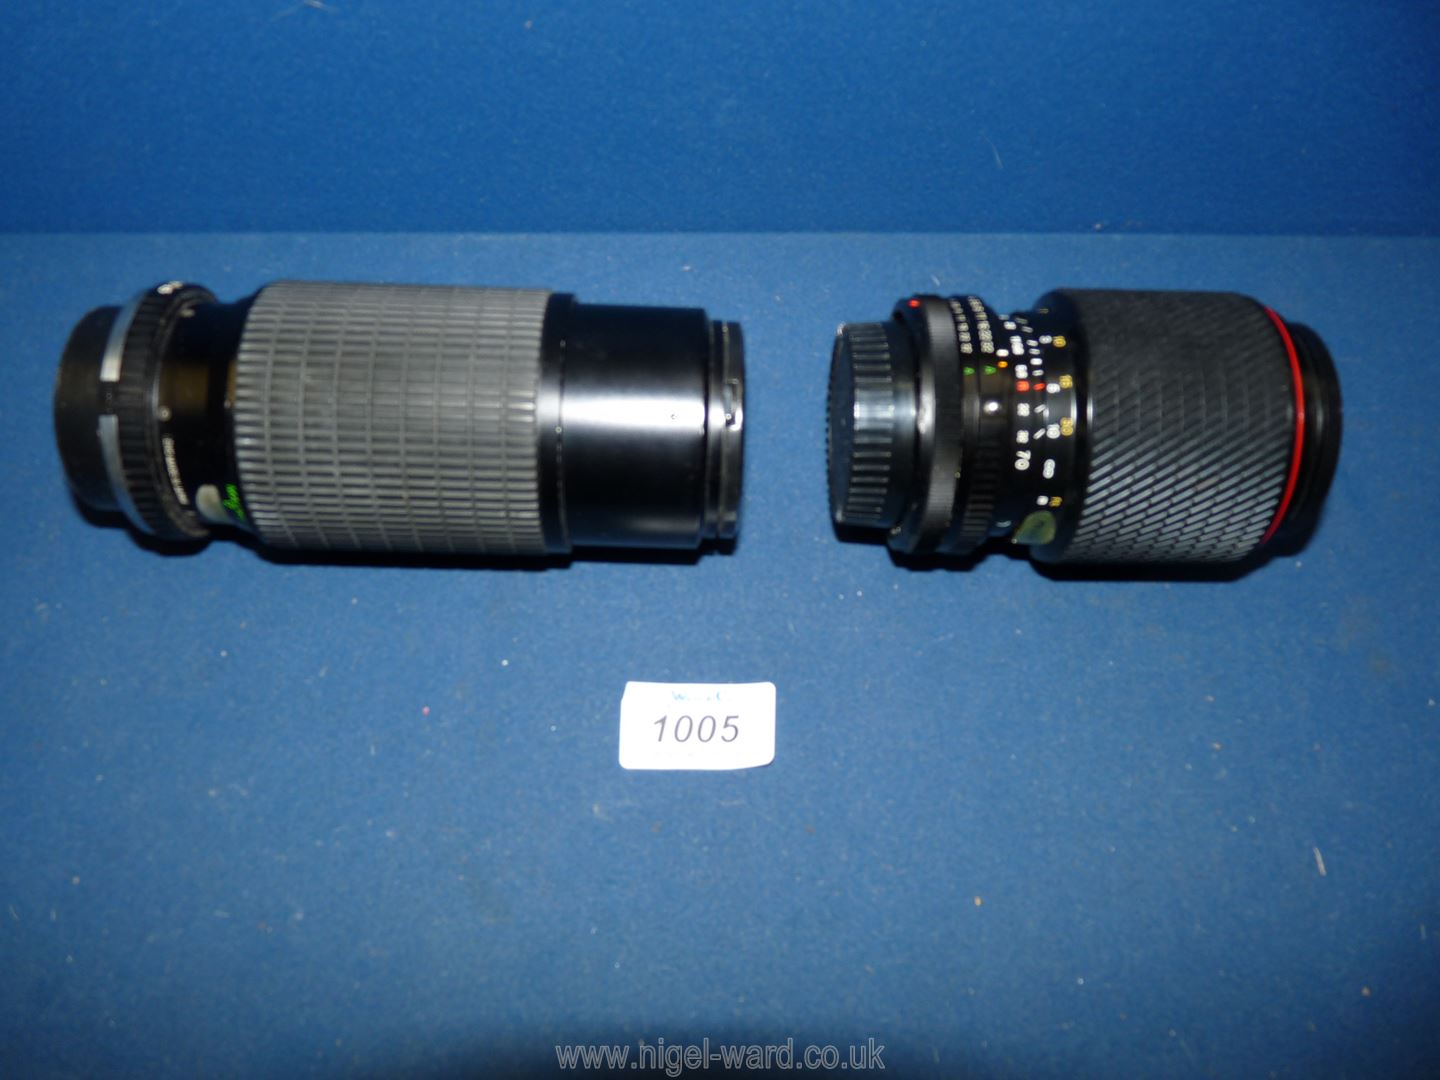 A Tokina Sd 70-210mm f/4 5.6 zoom lens to fit a Canon fd together with a Marexar cx 80-200mm f/4.